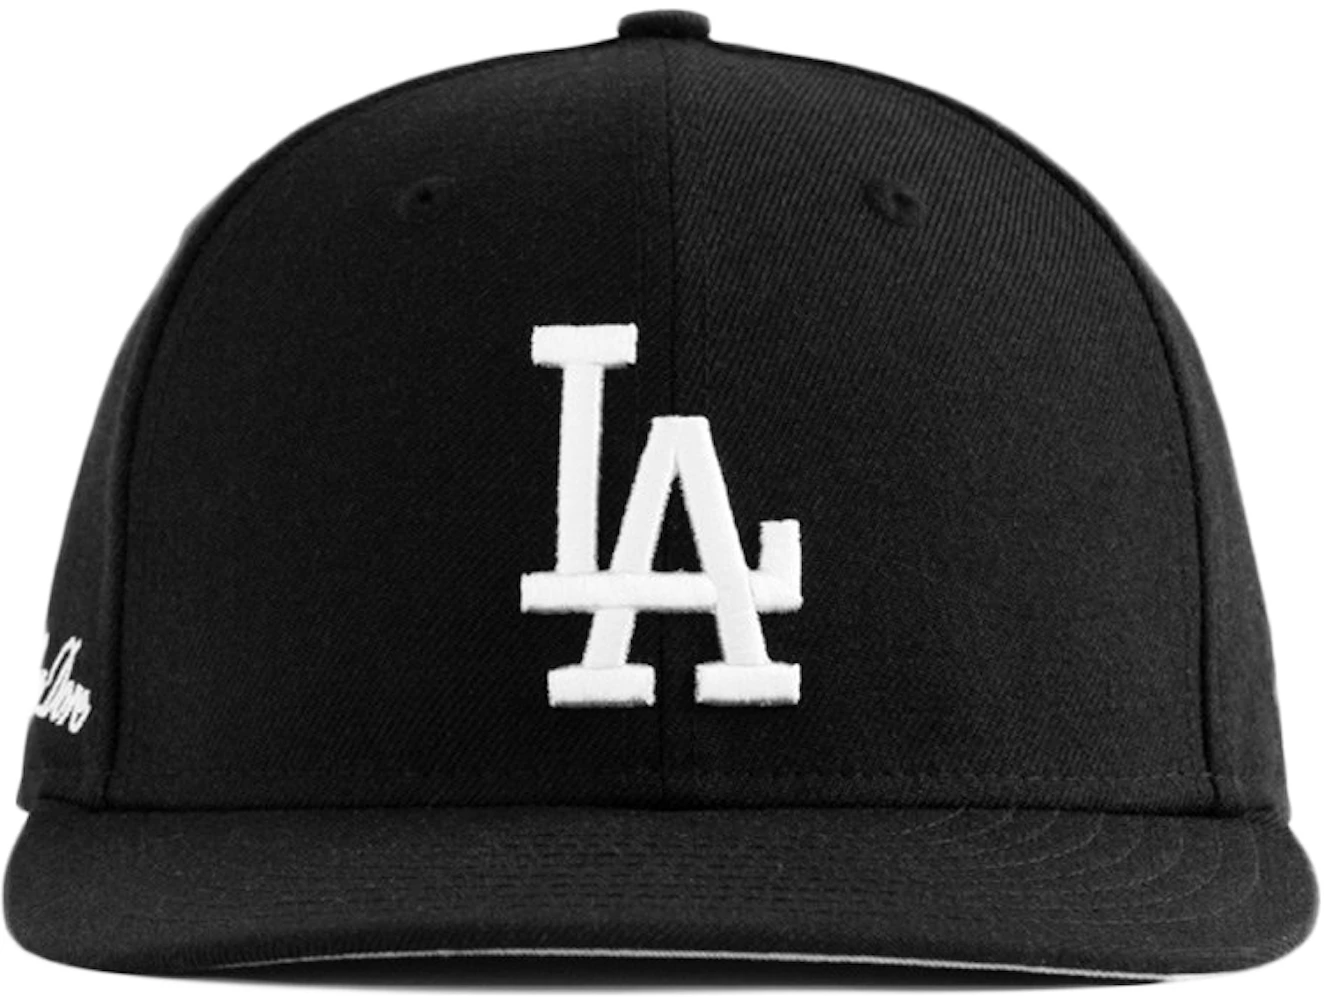 New Era, Accessories, La Dodgers All Star Hat 7 34 Fitted Low Profile